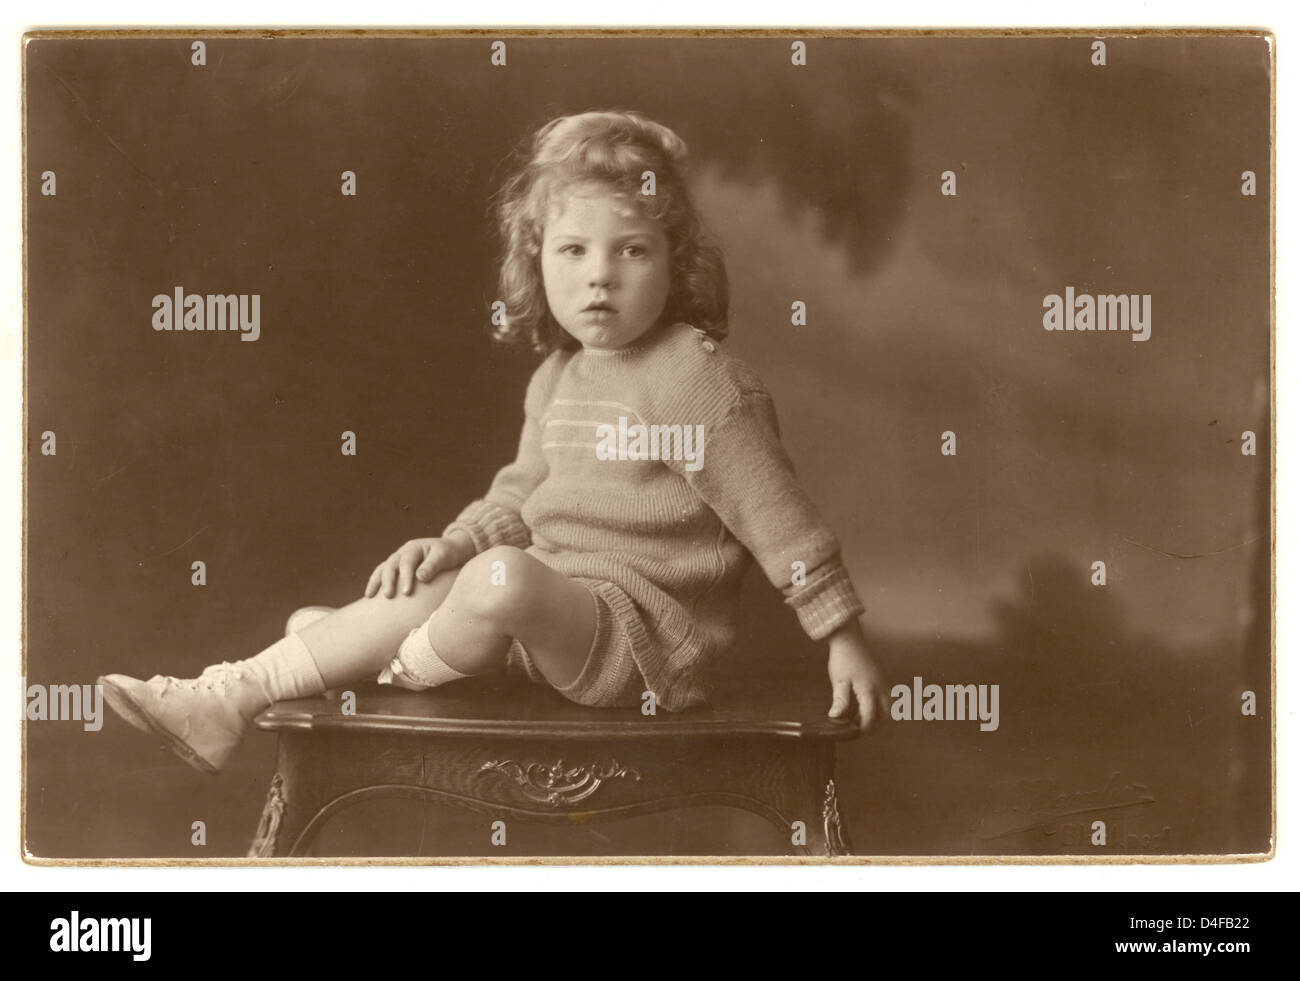 Studio portrait of young boy with curly long hair called Bernard, looking  at the camera, early 1920's, Brighton, Sussex, England,  Stock Photo -  Alamy